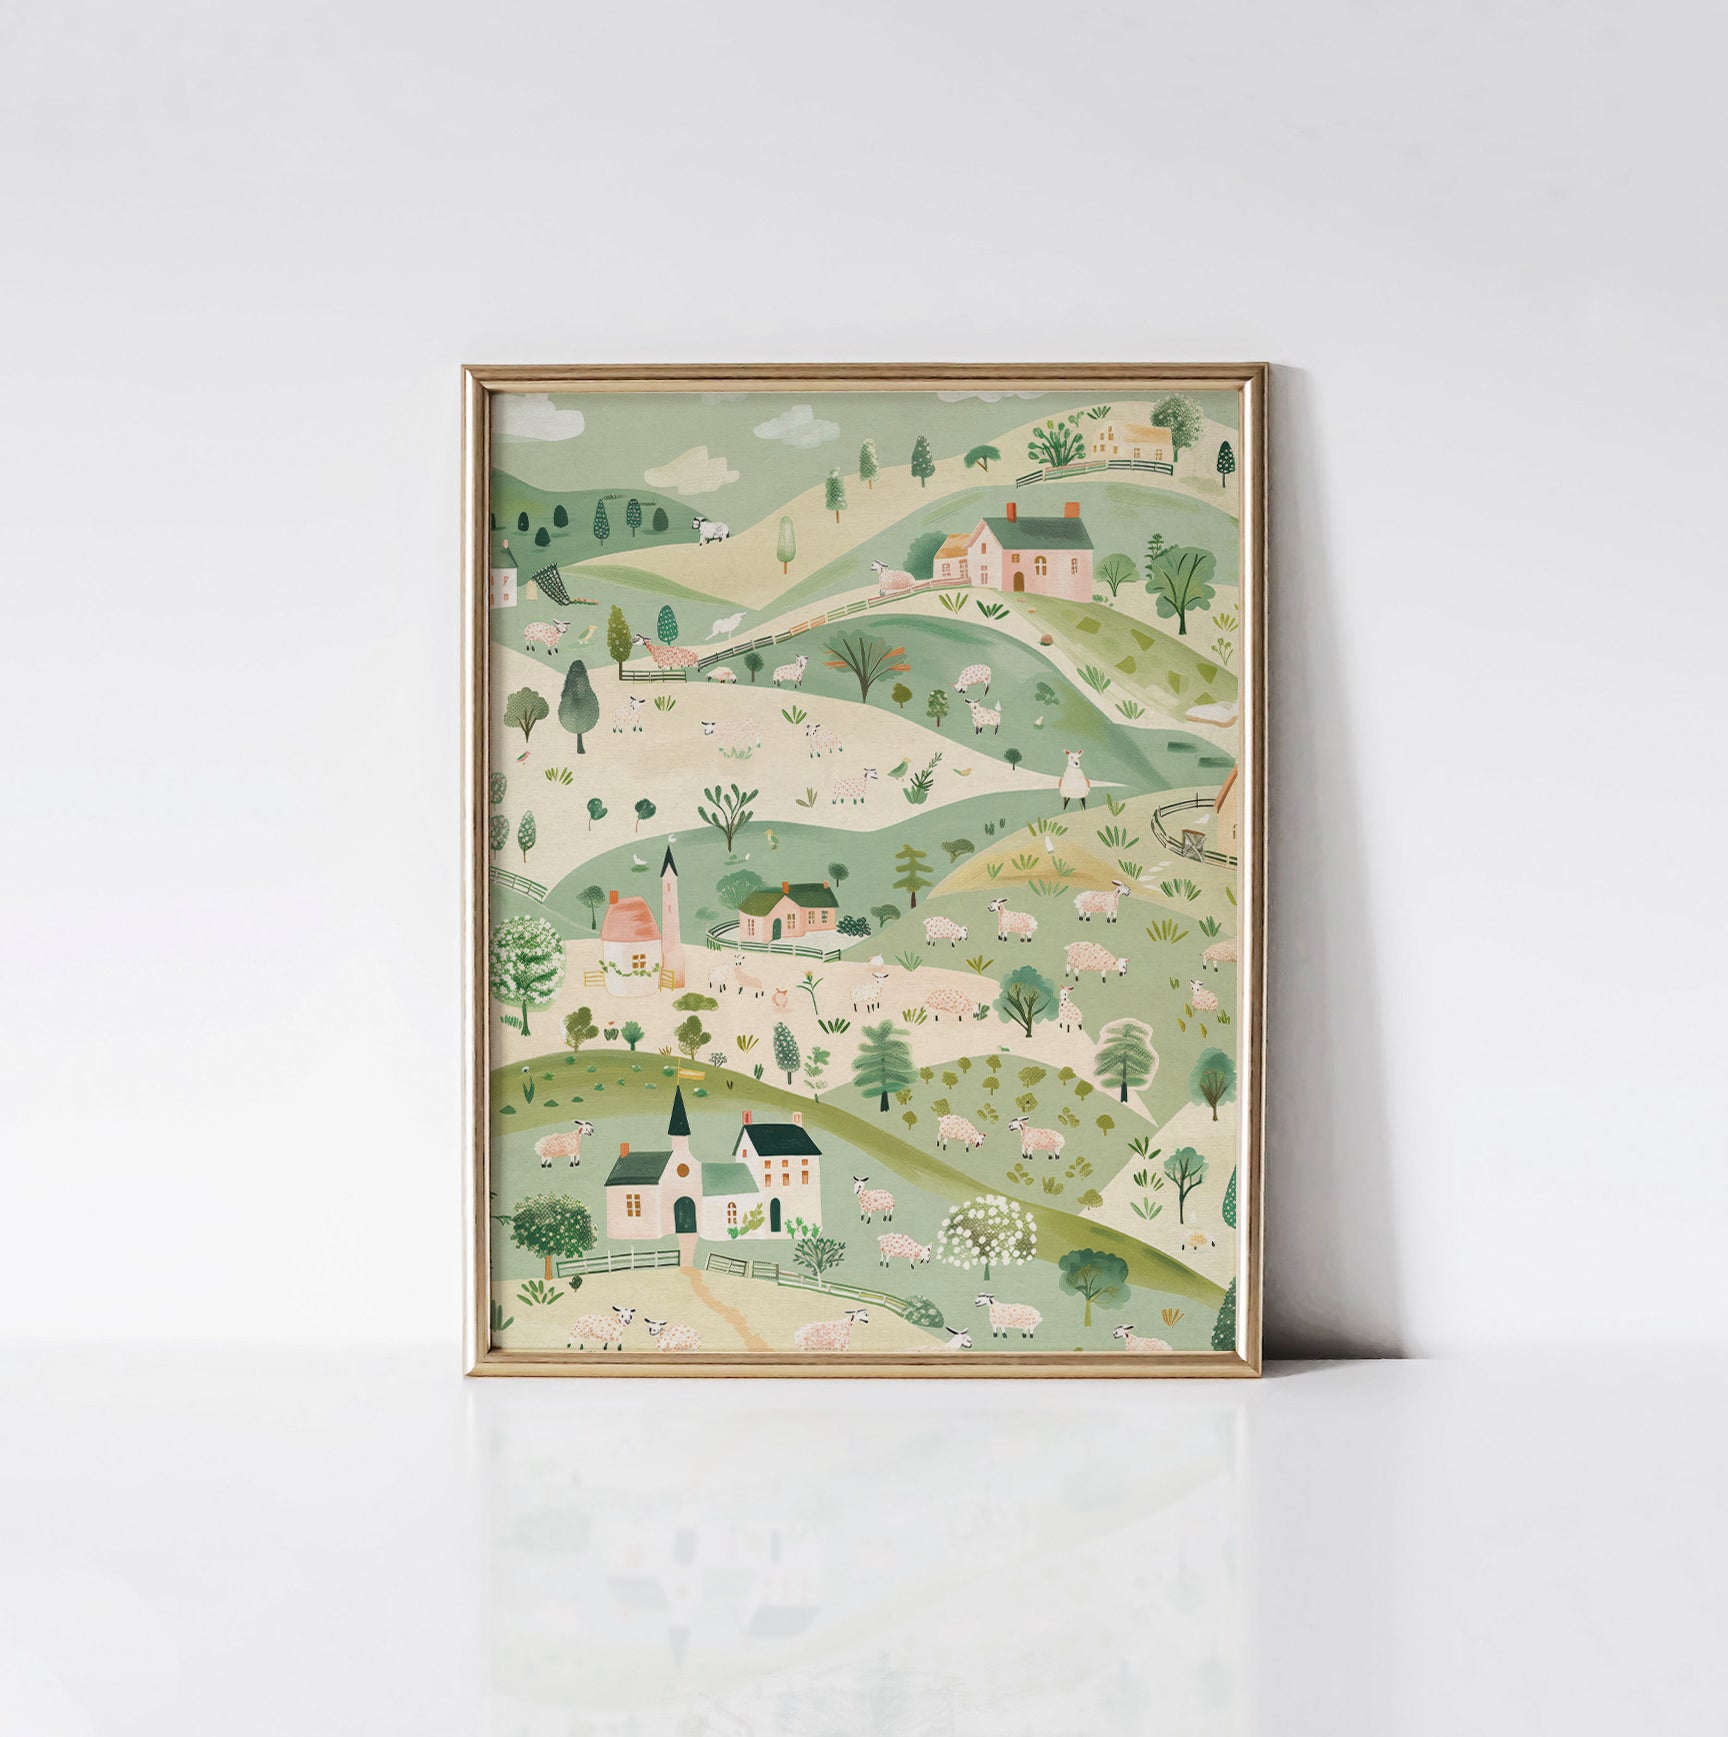 The "Pastoral Playground" art print displayed in a gold frame, showcasing a delightful countryside landscape with sheep, cottages, and rolling green hills.